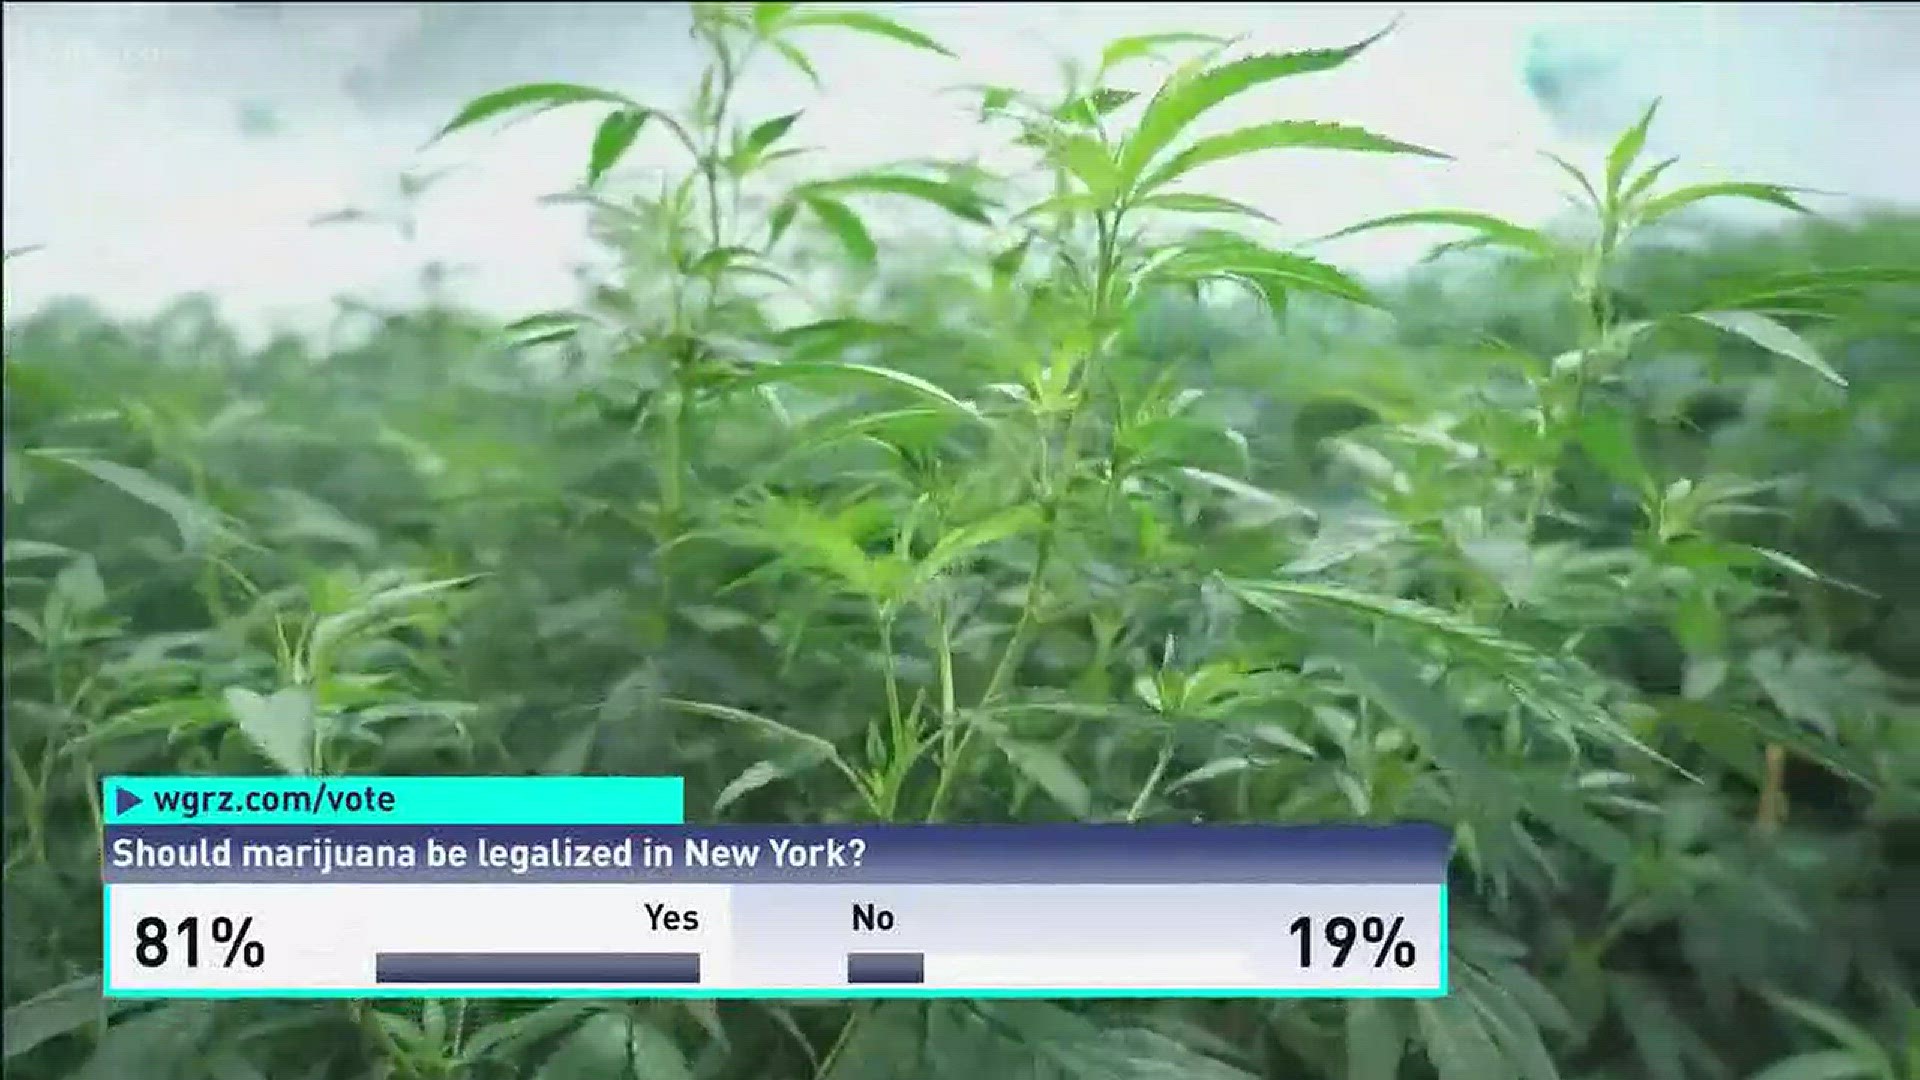 Should Marijuana Be Legalized In New York For Revenue?